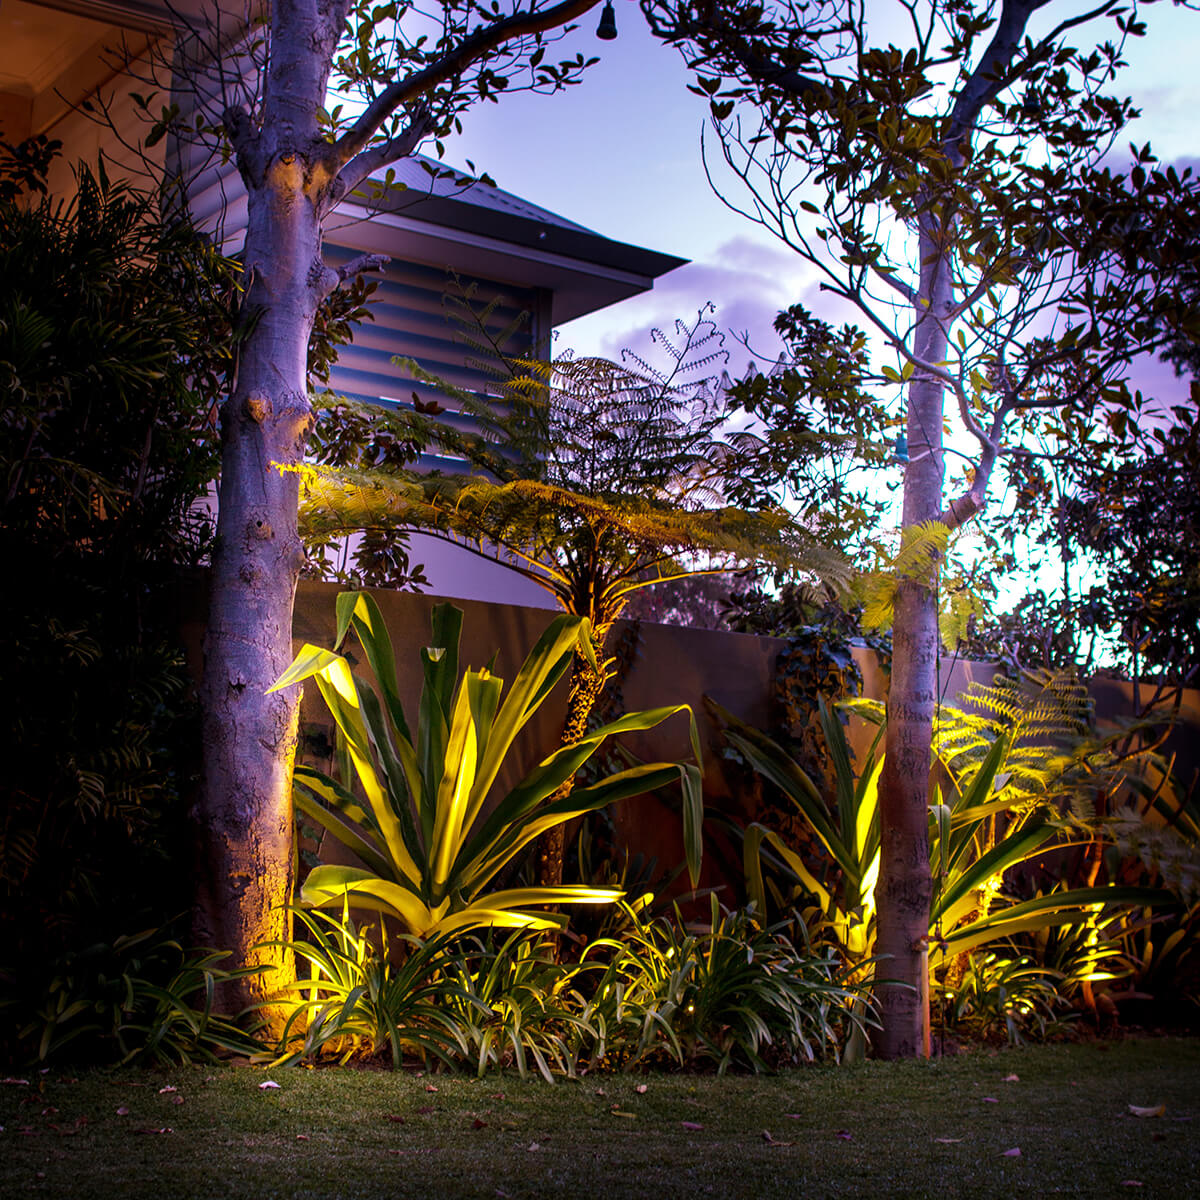 Outdoor Garden Lights With Smartphone, How To Control Landscape Lighting With Iphone